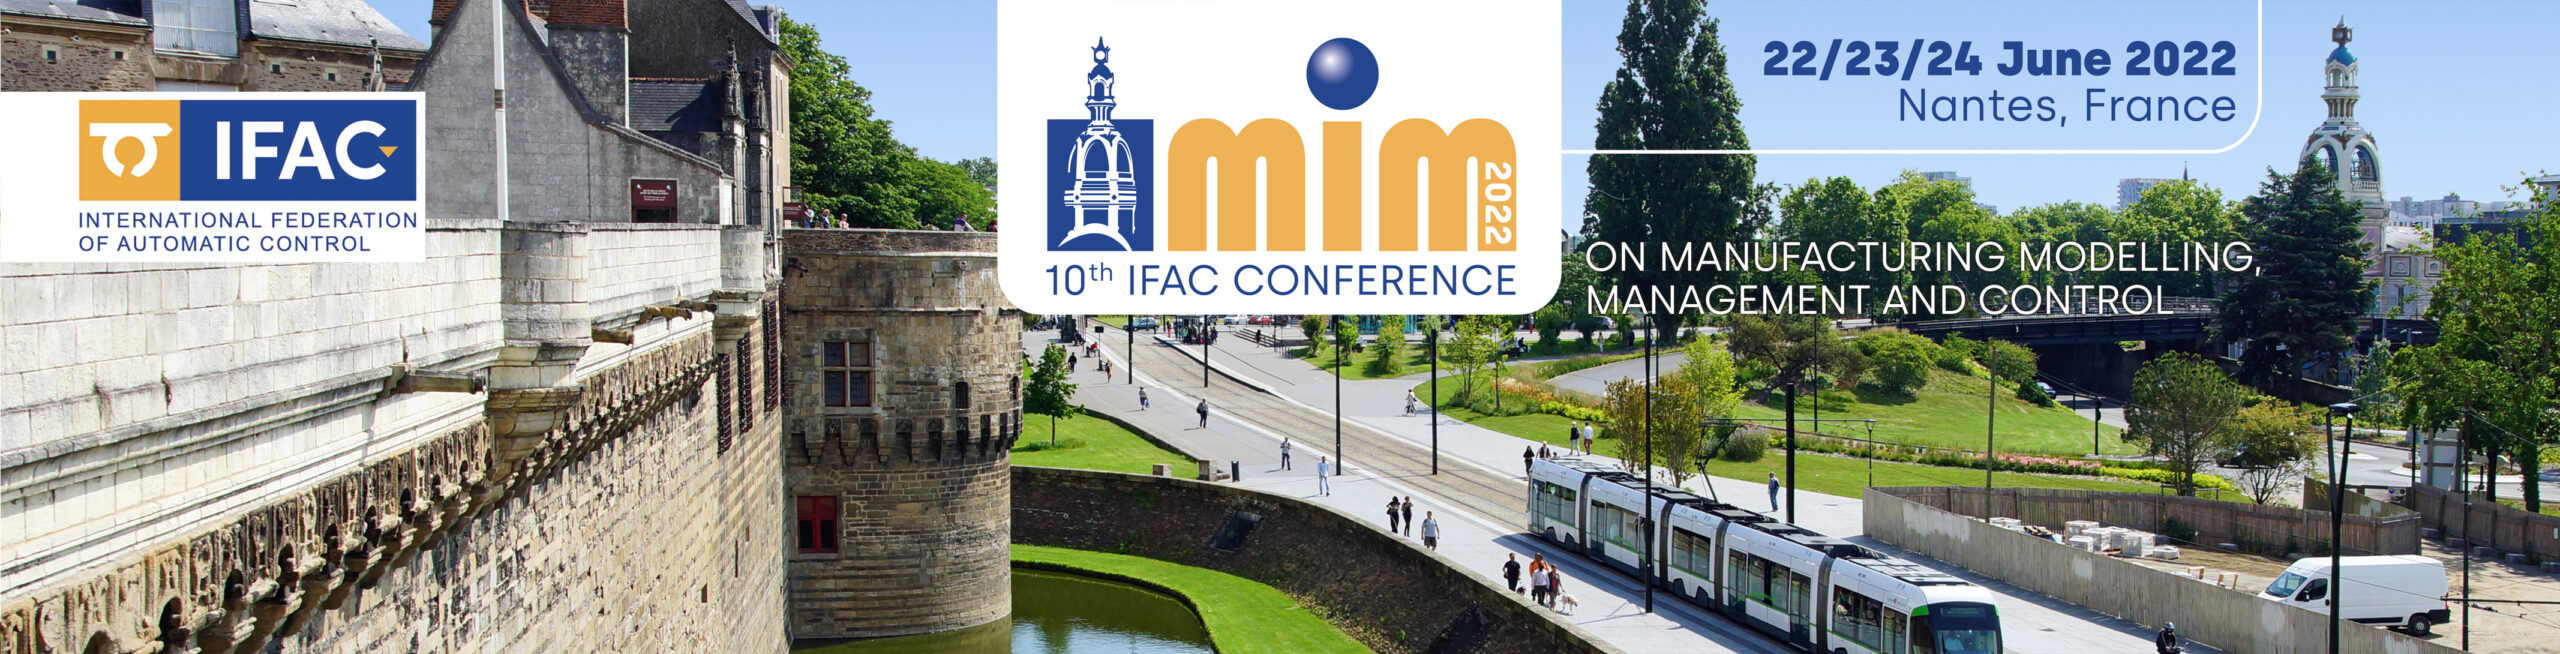 10th IFAC Conference Manufacturing Modelling, Management and Control ...